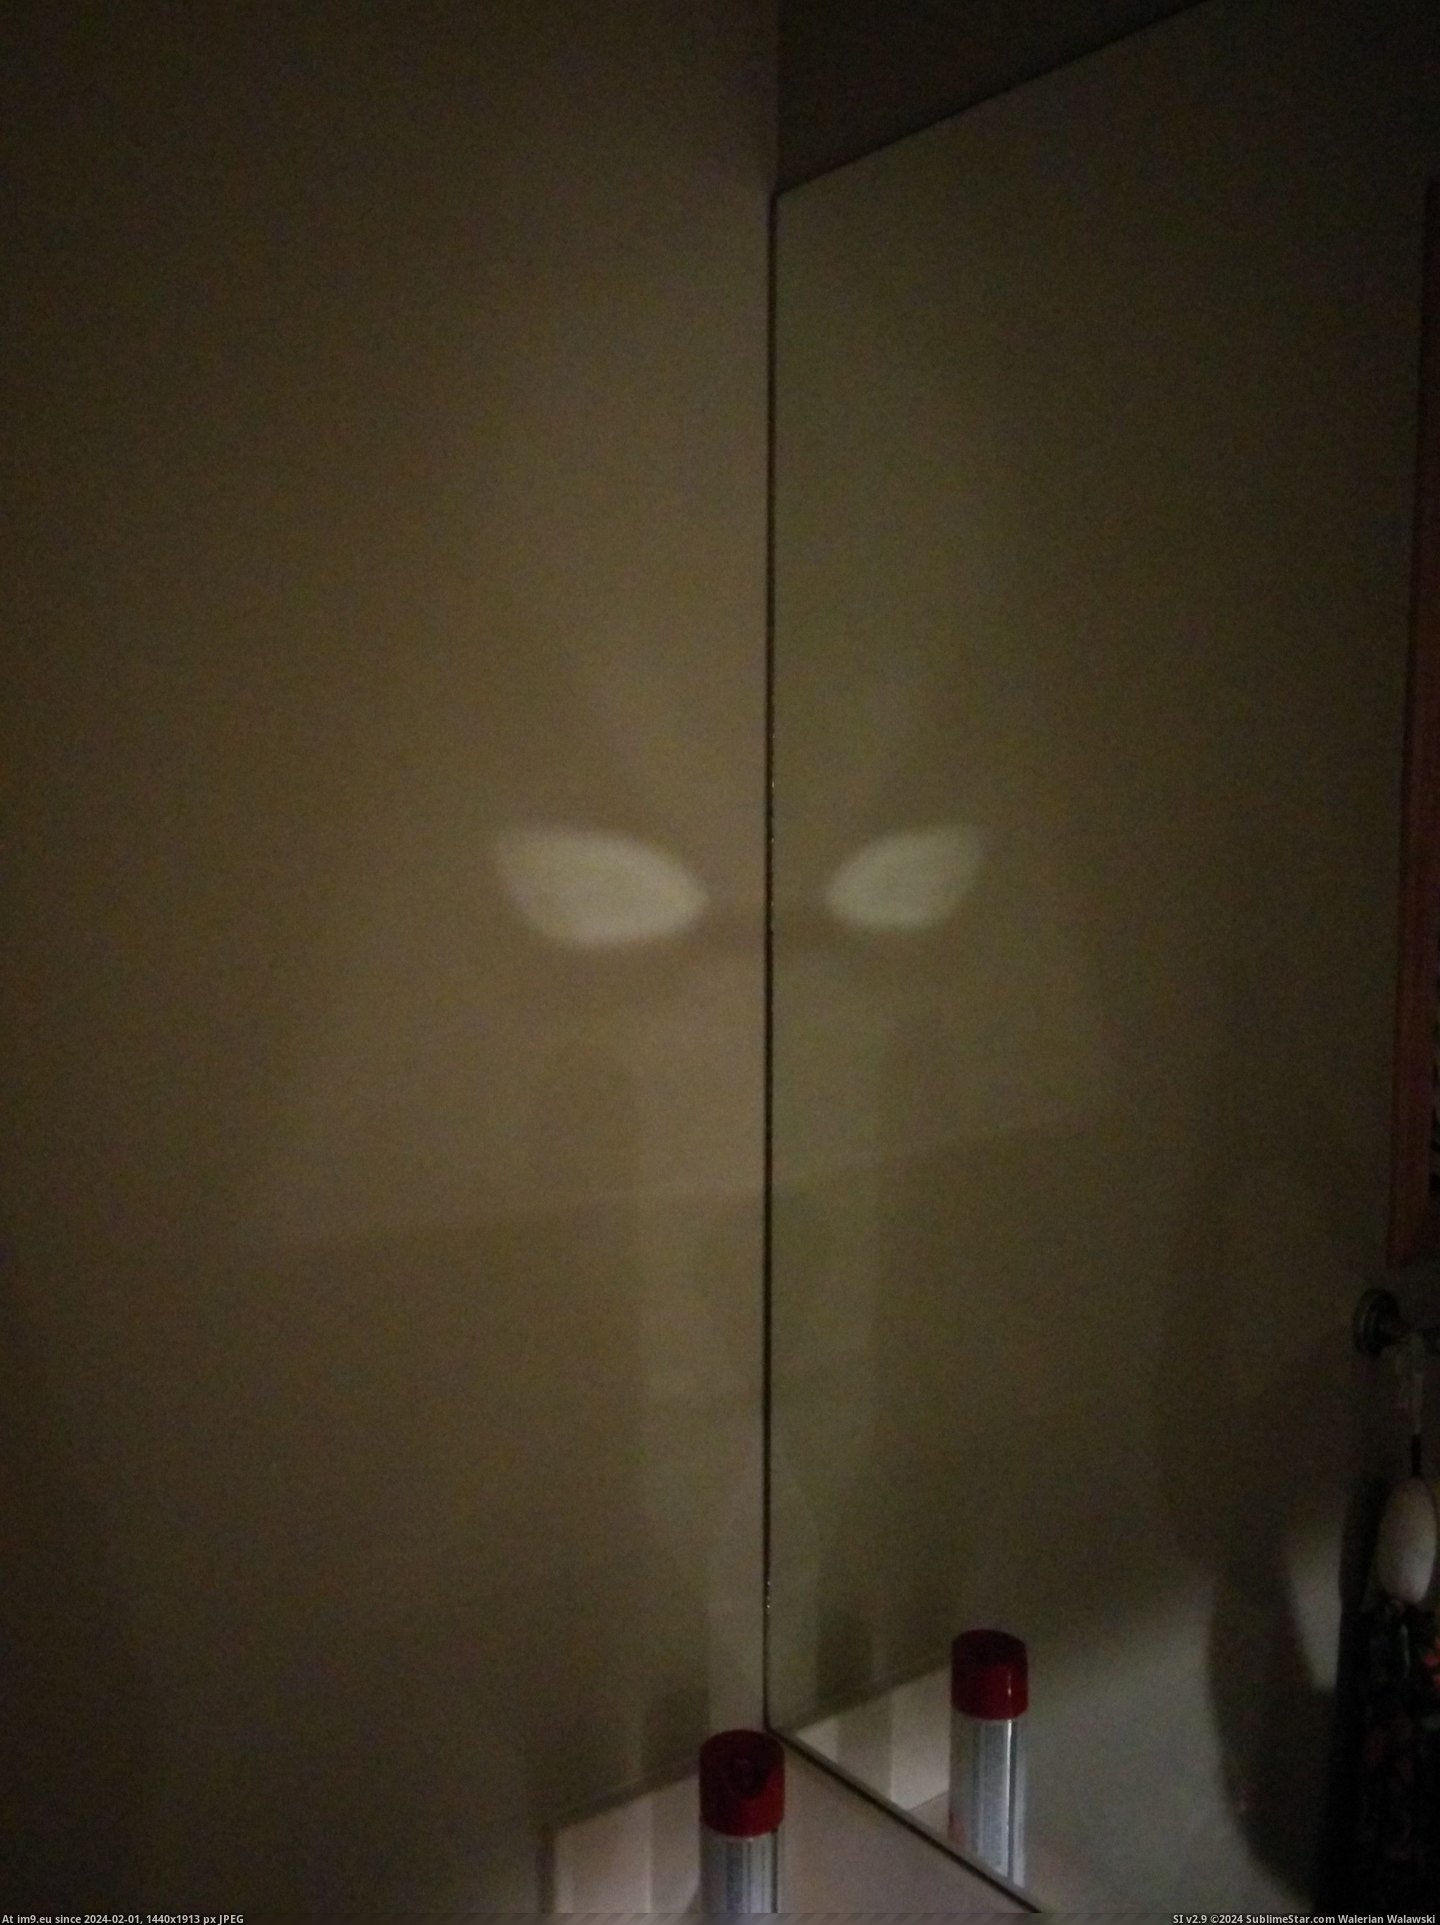 #Mirror #Bathroom #Darth #Vader #Wall #Reflection [Mildlyinteresting] Darth Vader reflection the bathroom mirror made against the wall Pic. (Image of album My r/MILDLYINTERESTING favs))